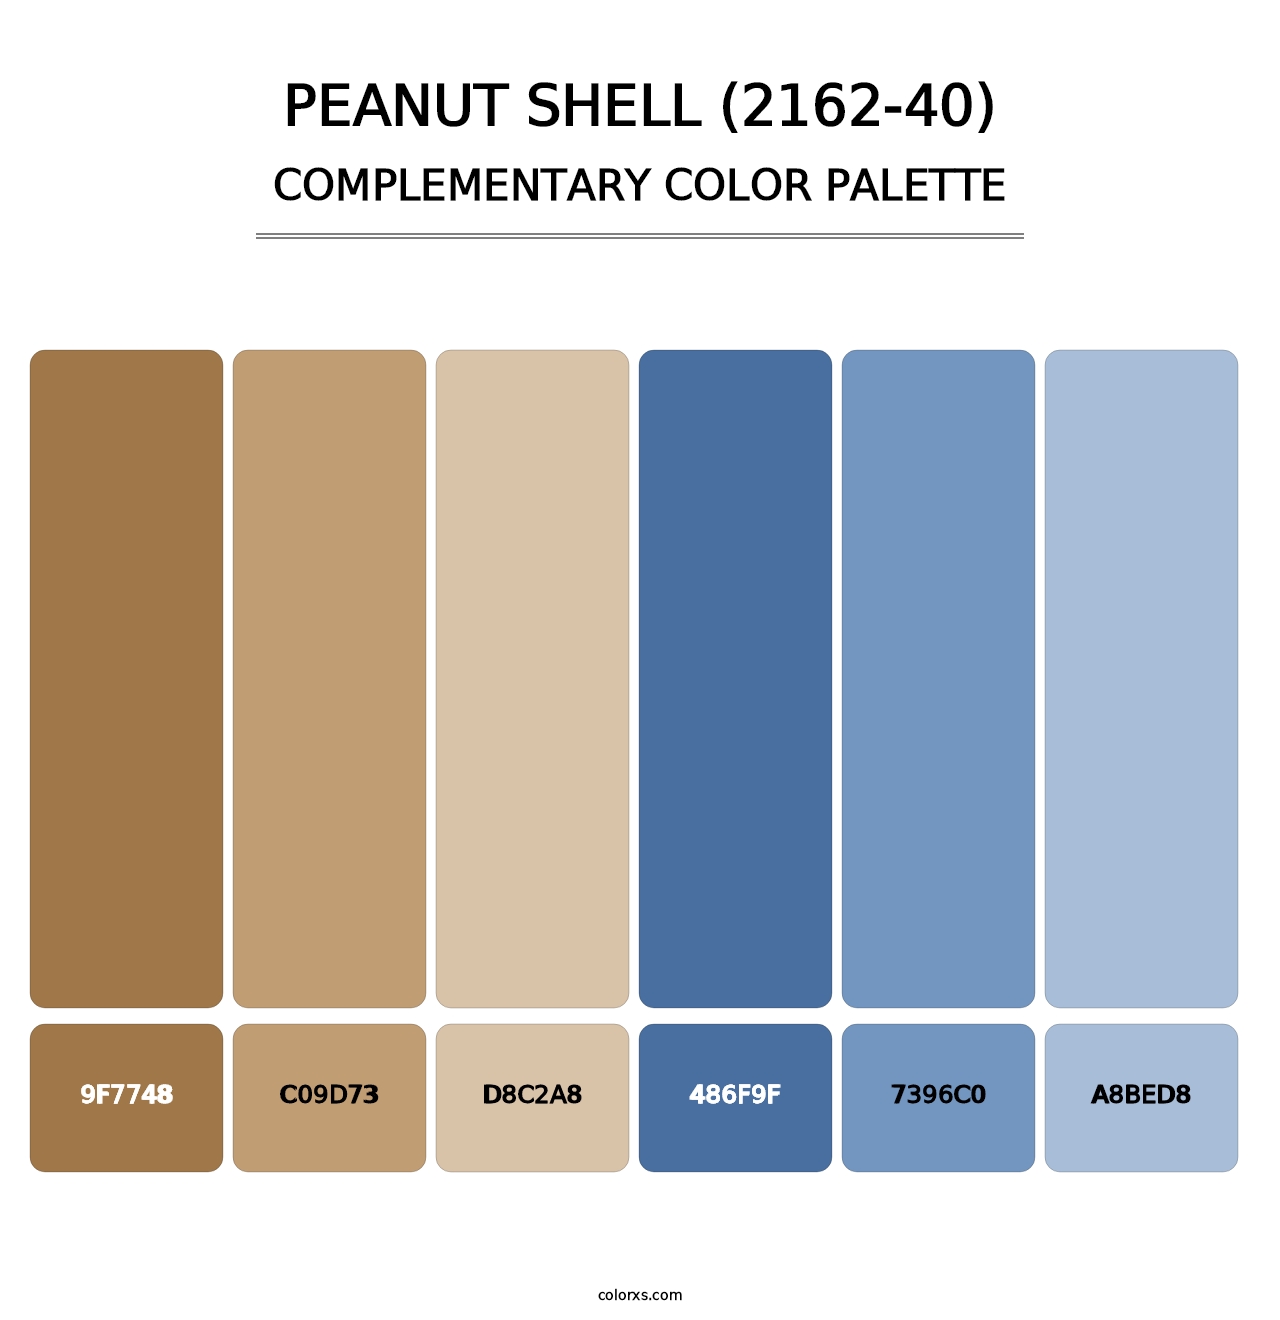 Peanut Shell (2162-40) - Complementary Color Palette